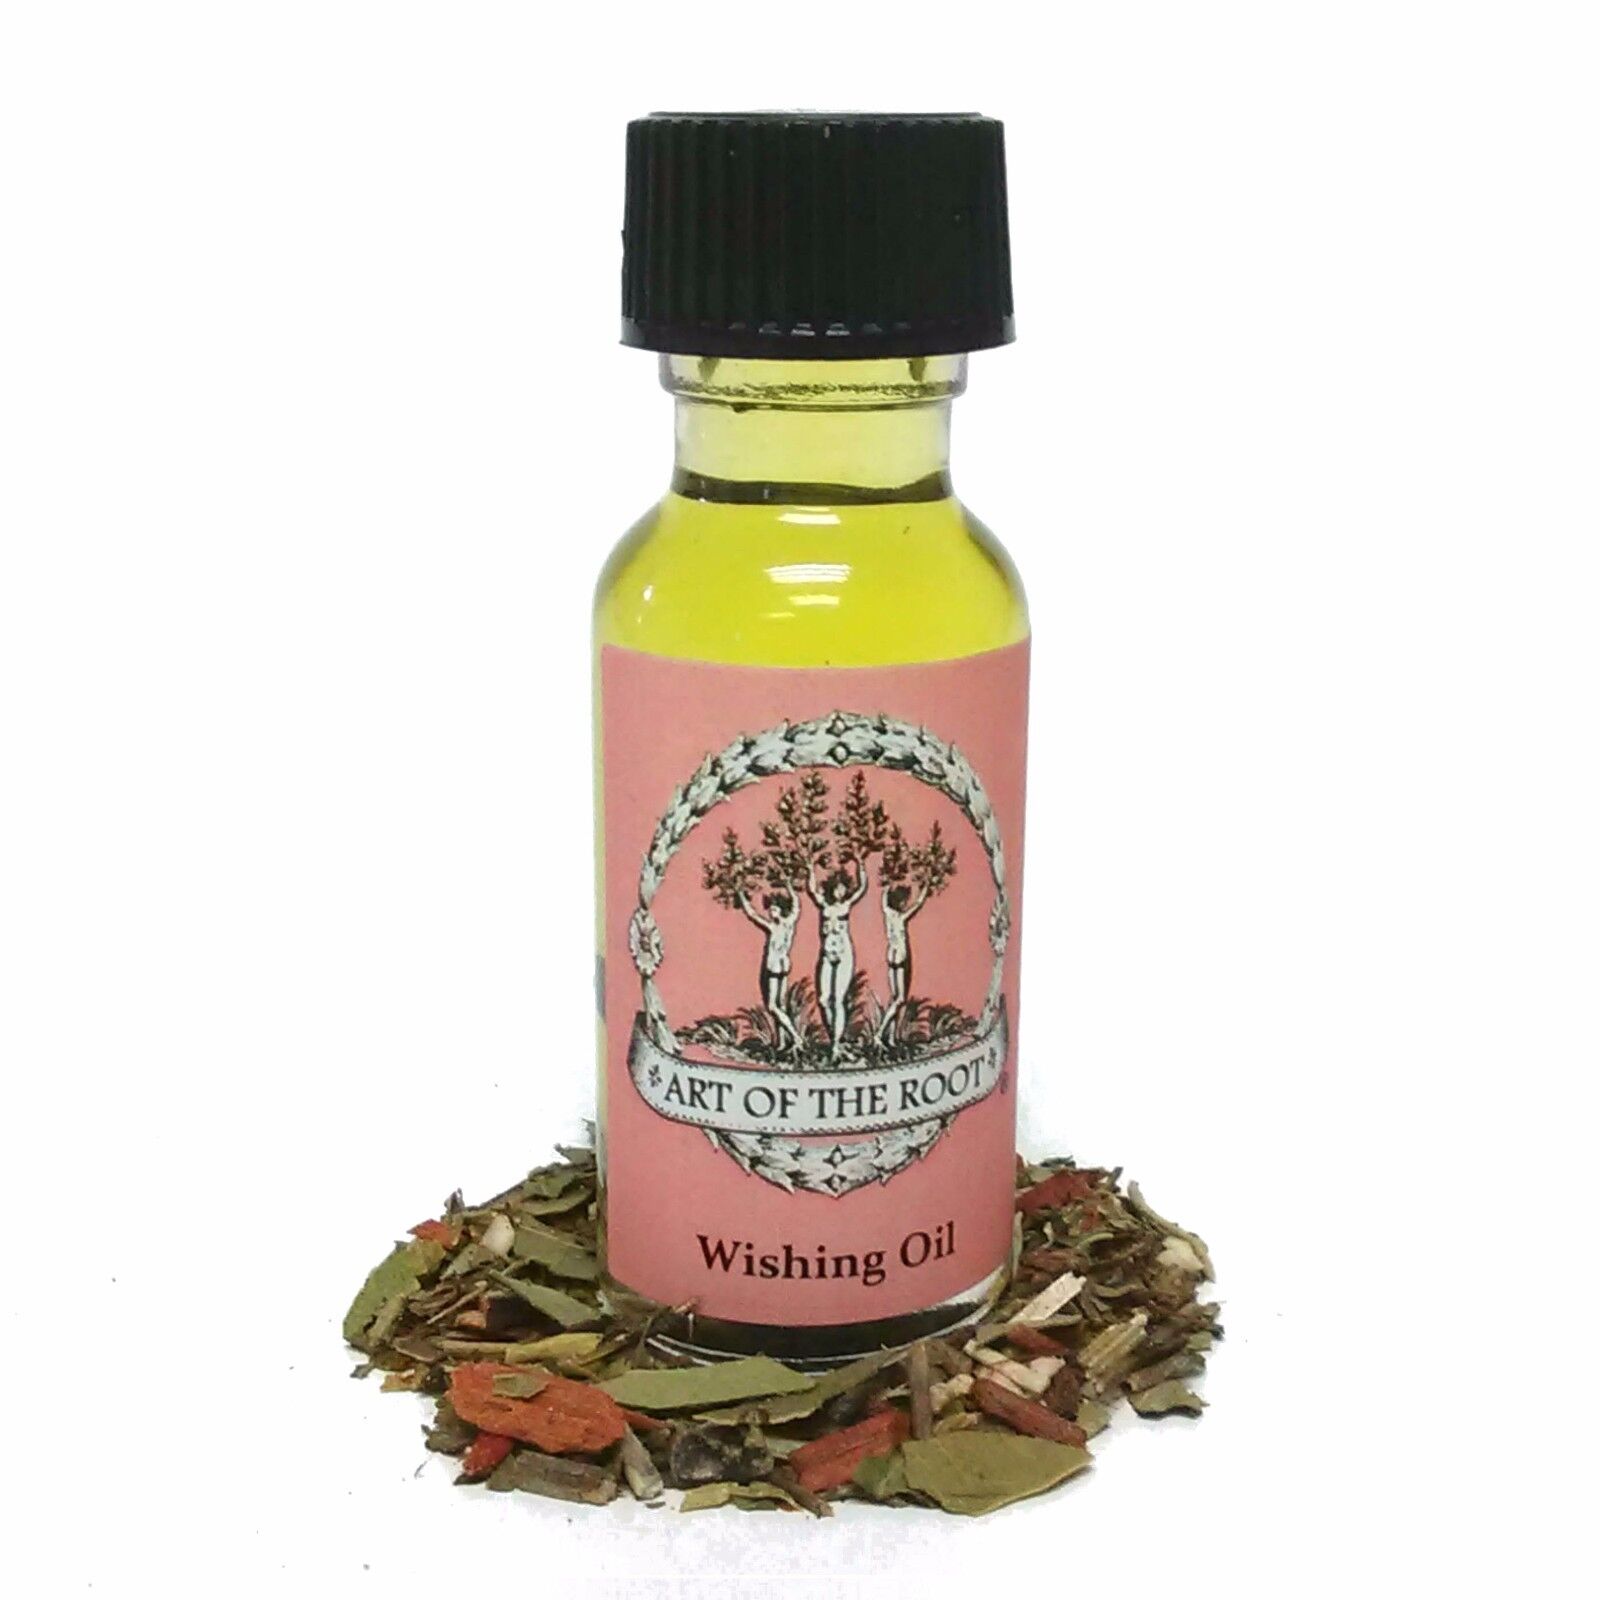 Wishing Oil Goals Desires Requests Wishes Dreams Hoodoo Wicca Pagan Conjure